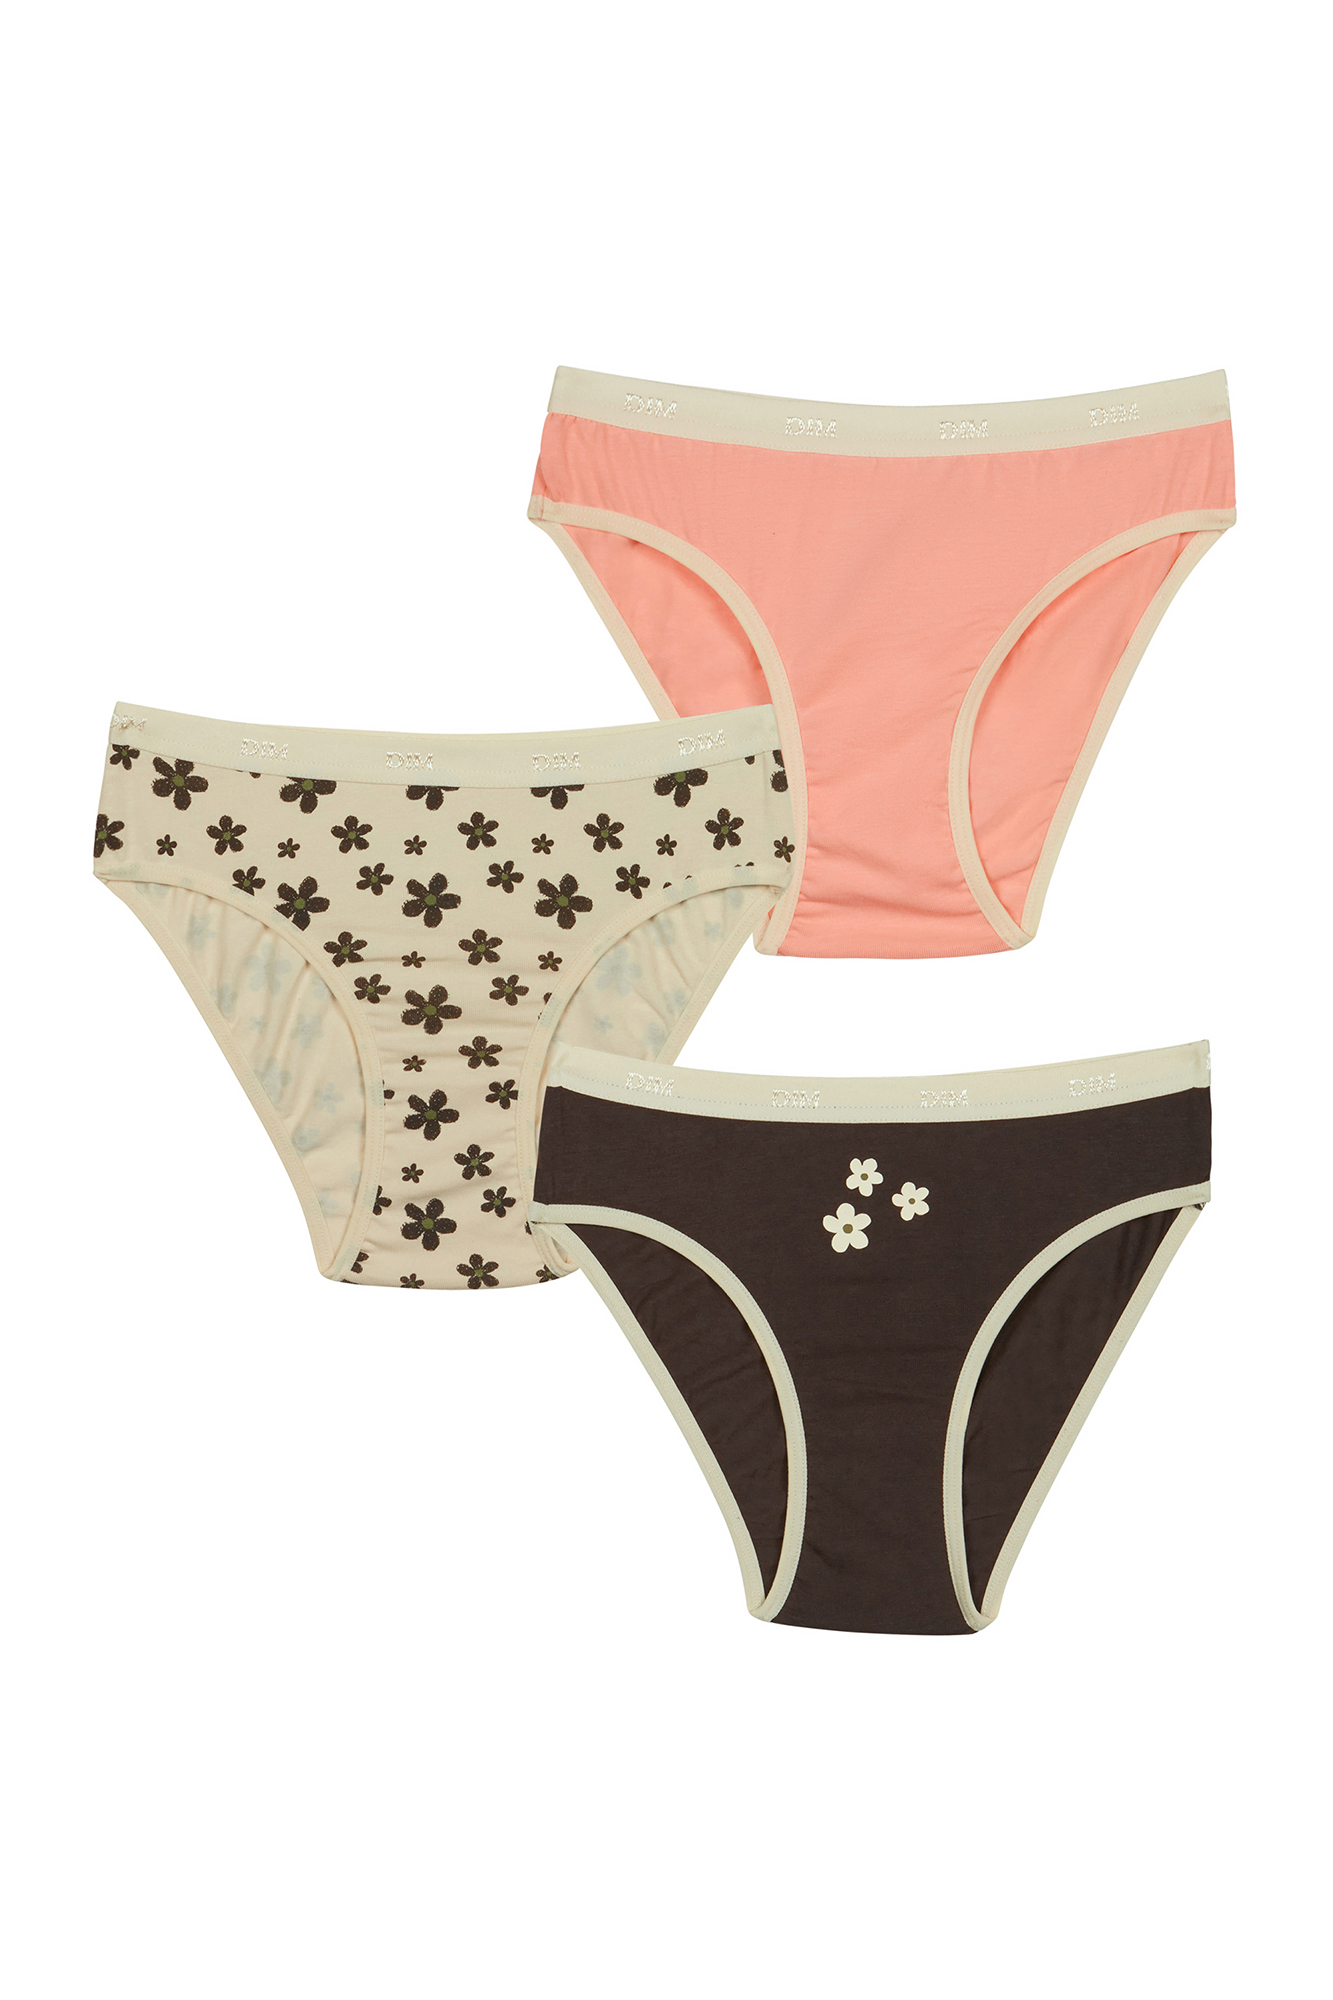 Pack of 3 pairs of girls' printed briefs with elasticated waist